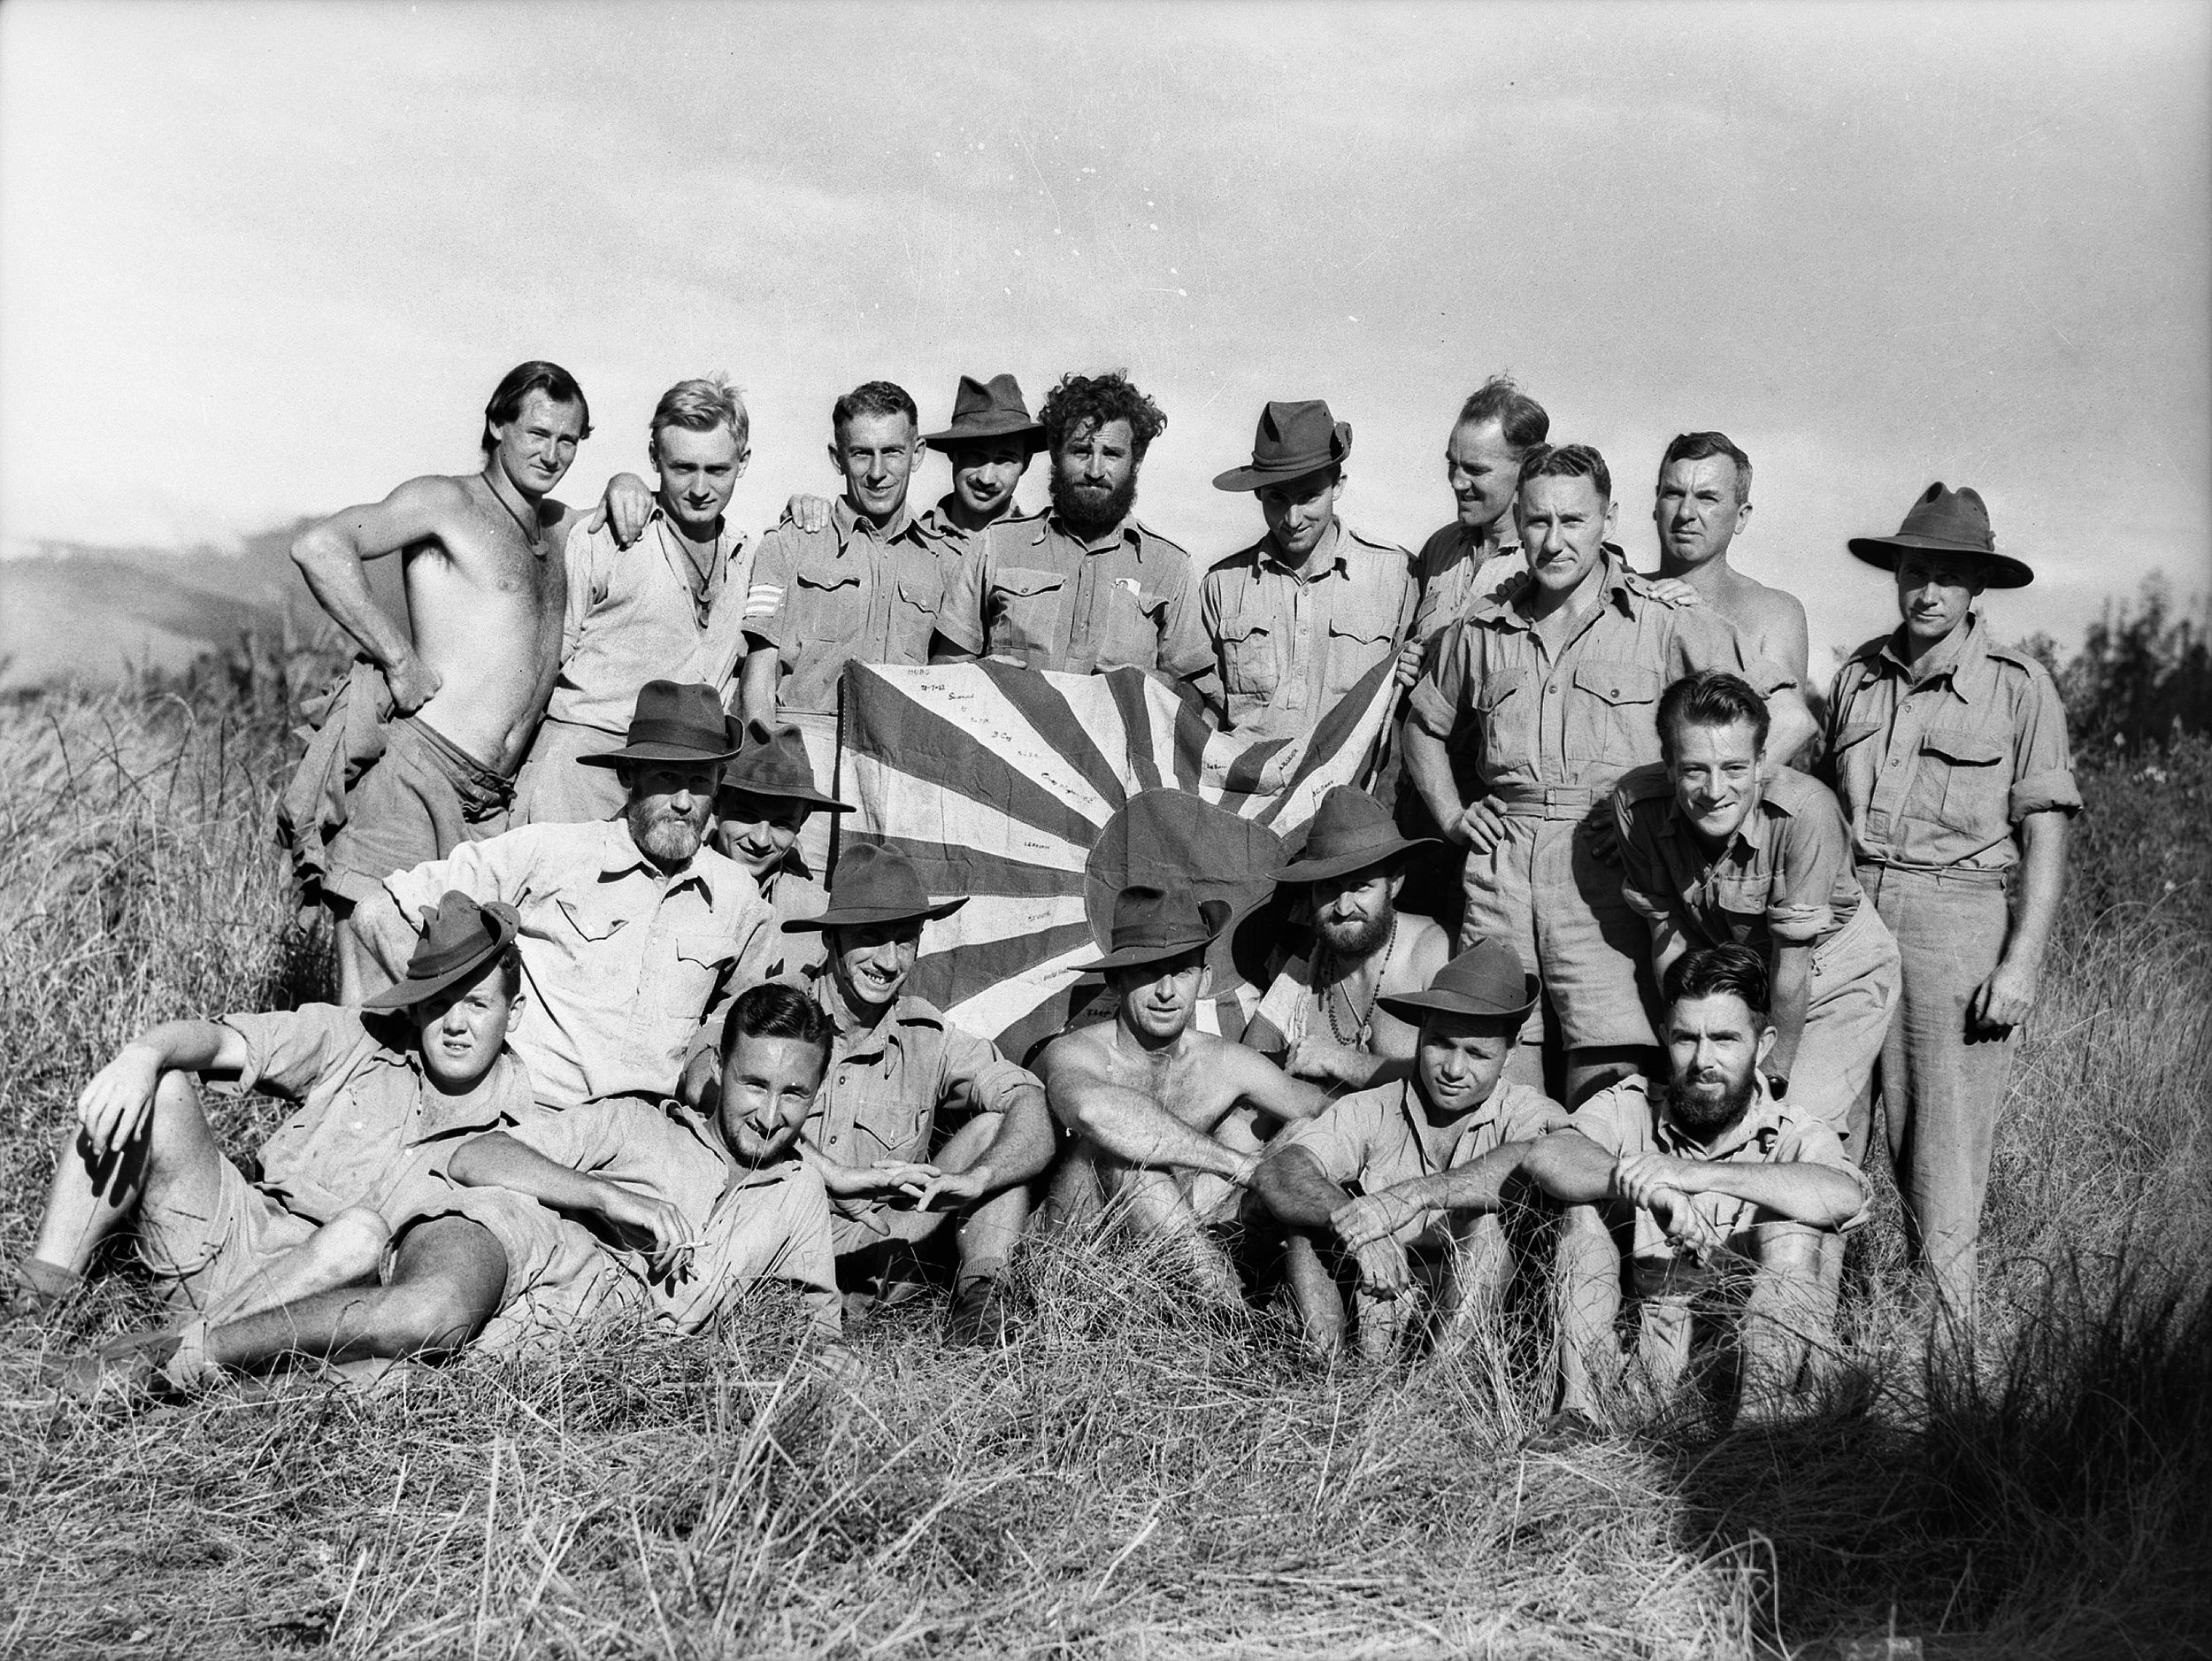 Troops of B Company of the New Guinea Volunteer Rifles stand proudly with a Japanese flag they have captured in battle at Mubo on July 21, 1942.